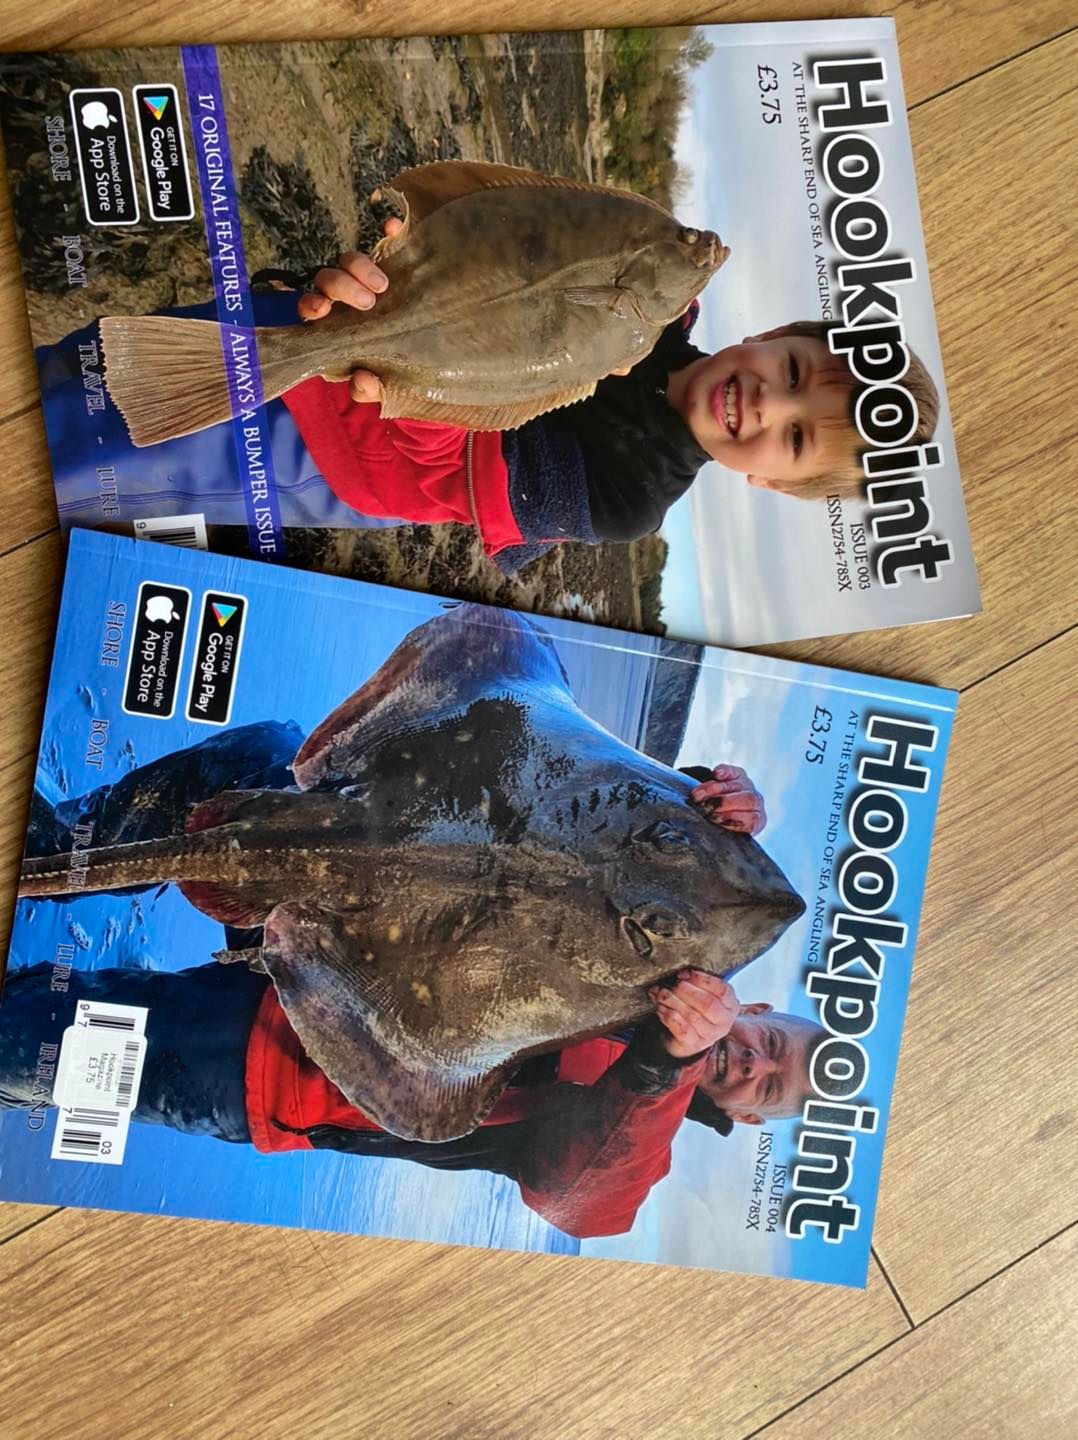 Nice bit of sponsorship from Hook Point magazine to give out free magazines for largest fish